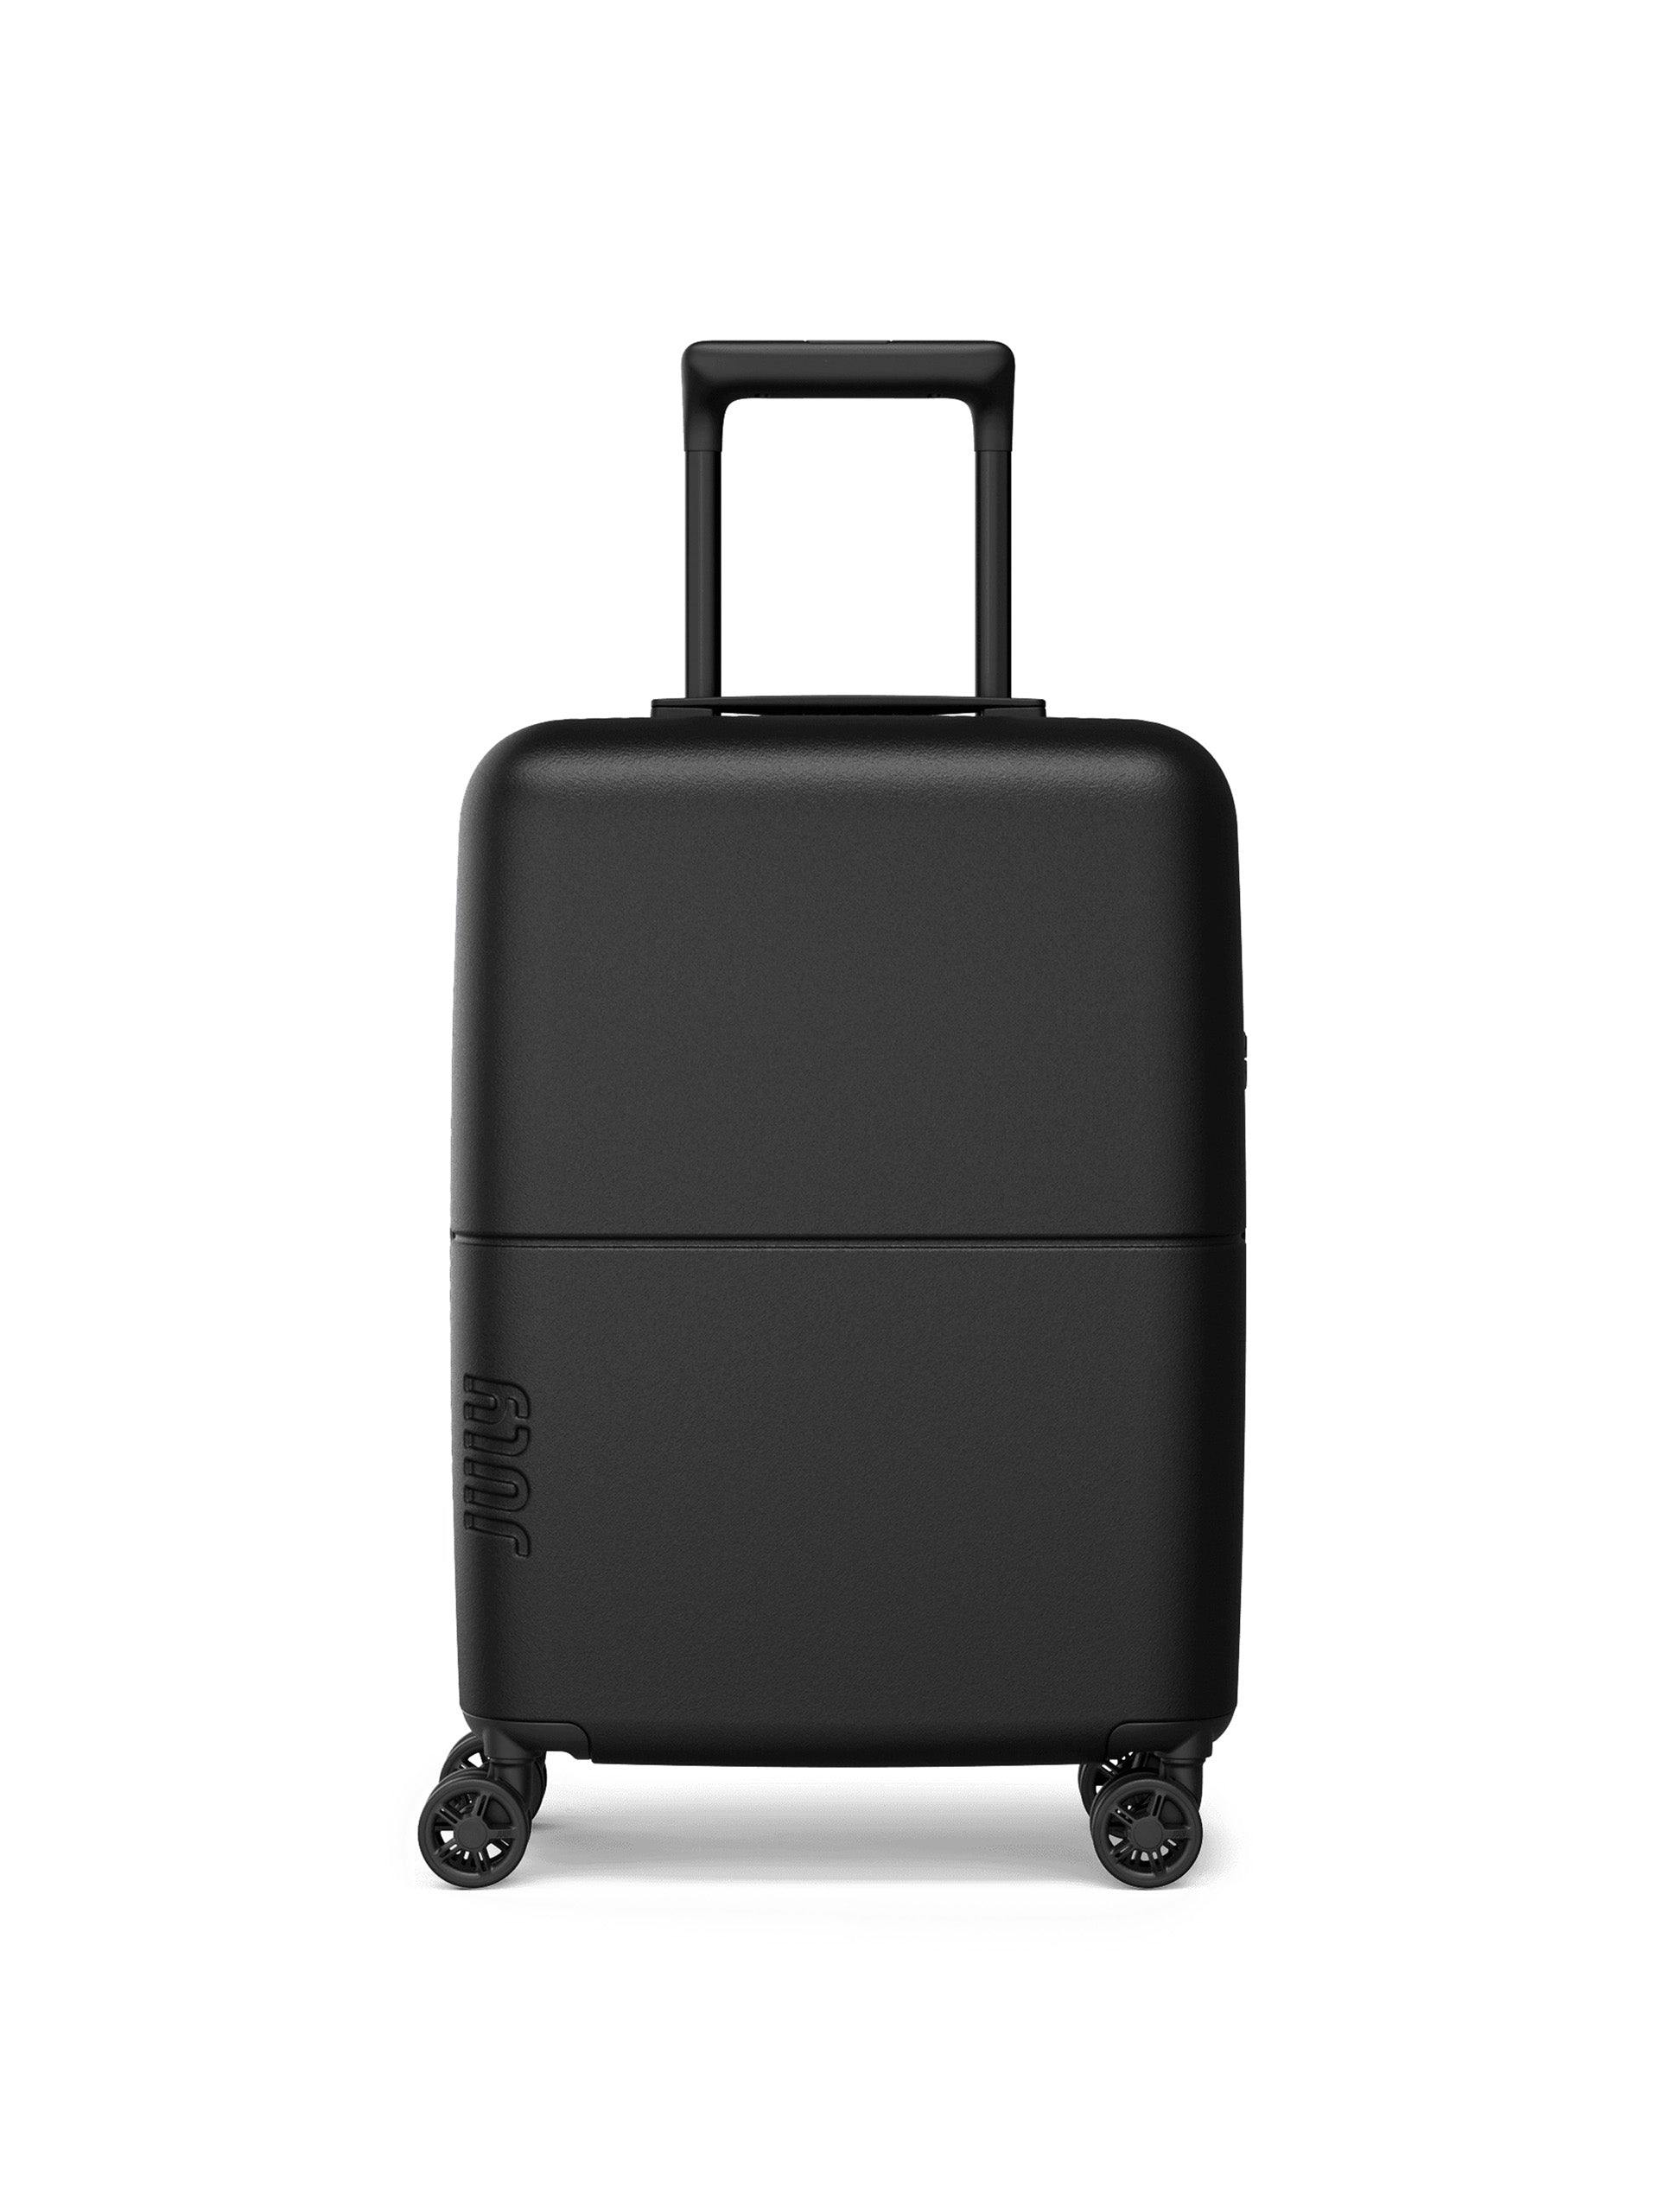 Charcoal carry-on suitcase